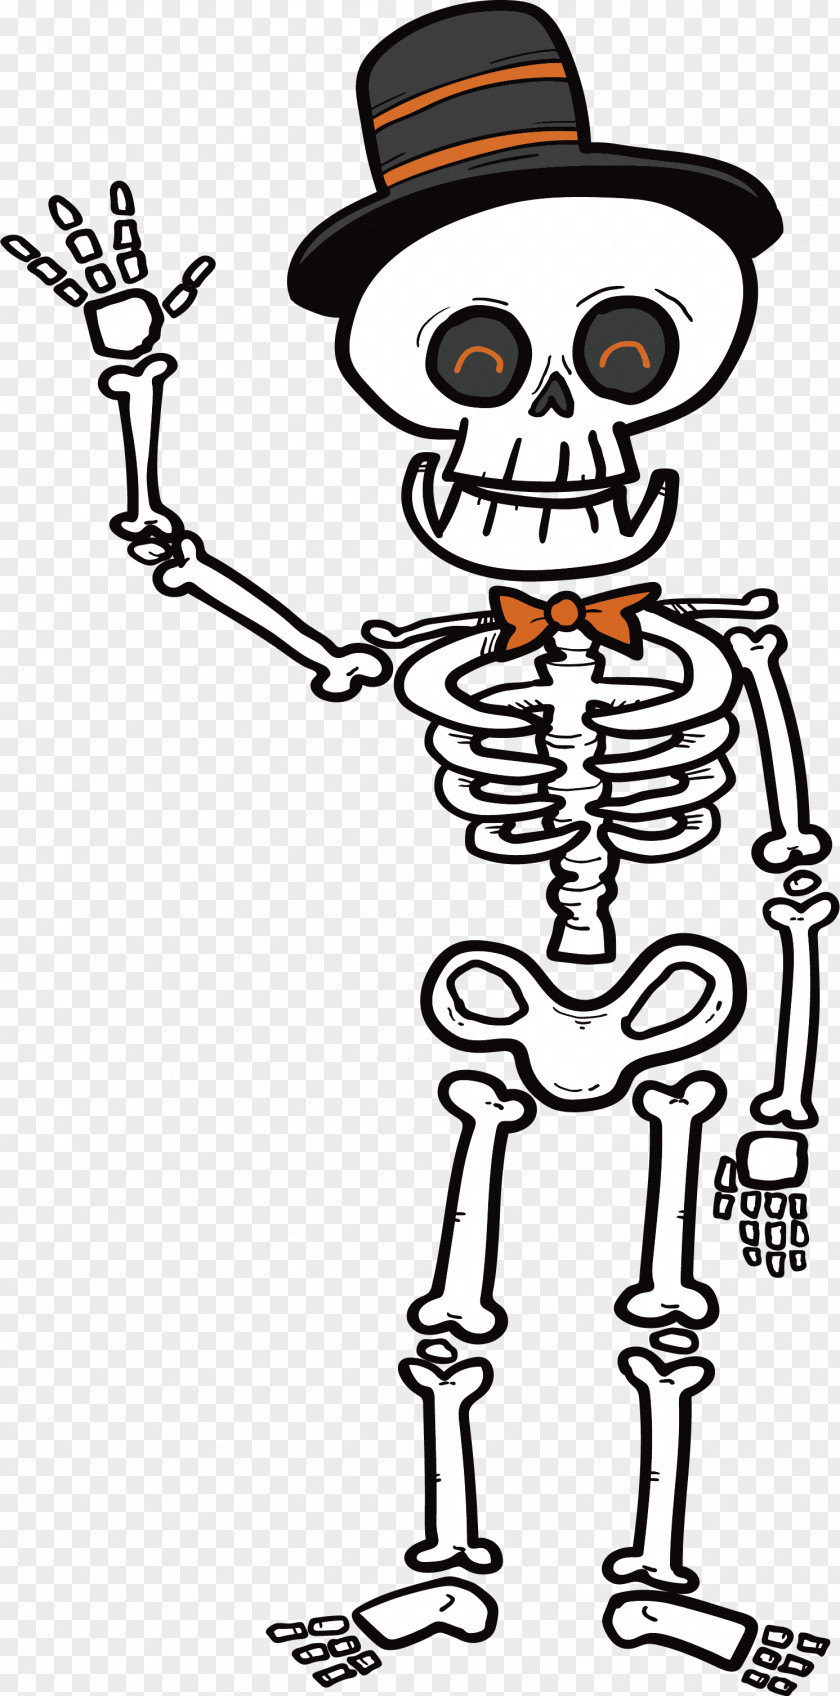 A Greeting Skeleton Human Microsoft PowerPoint Clip Art PNG